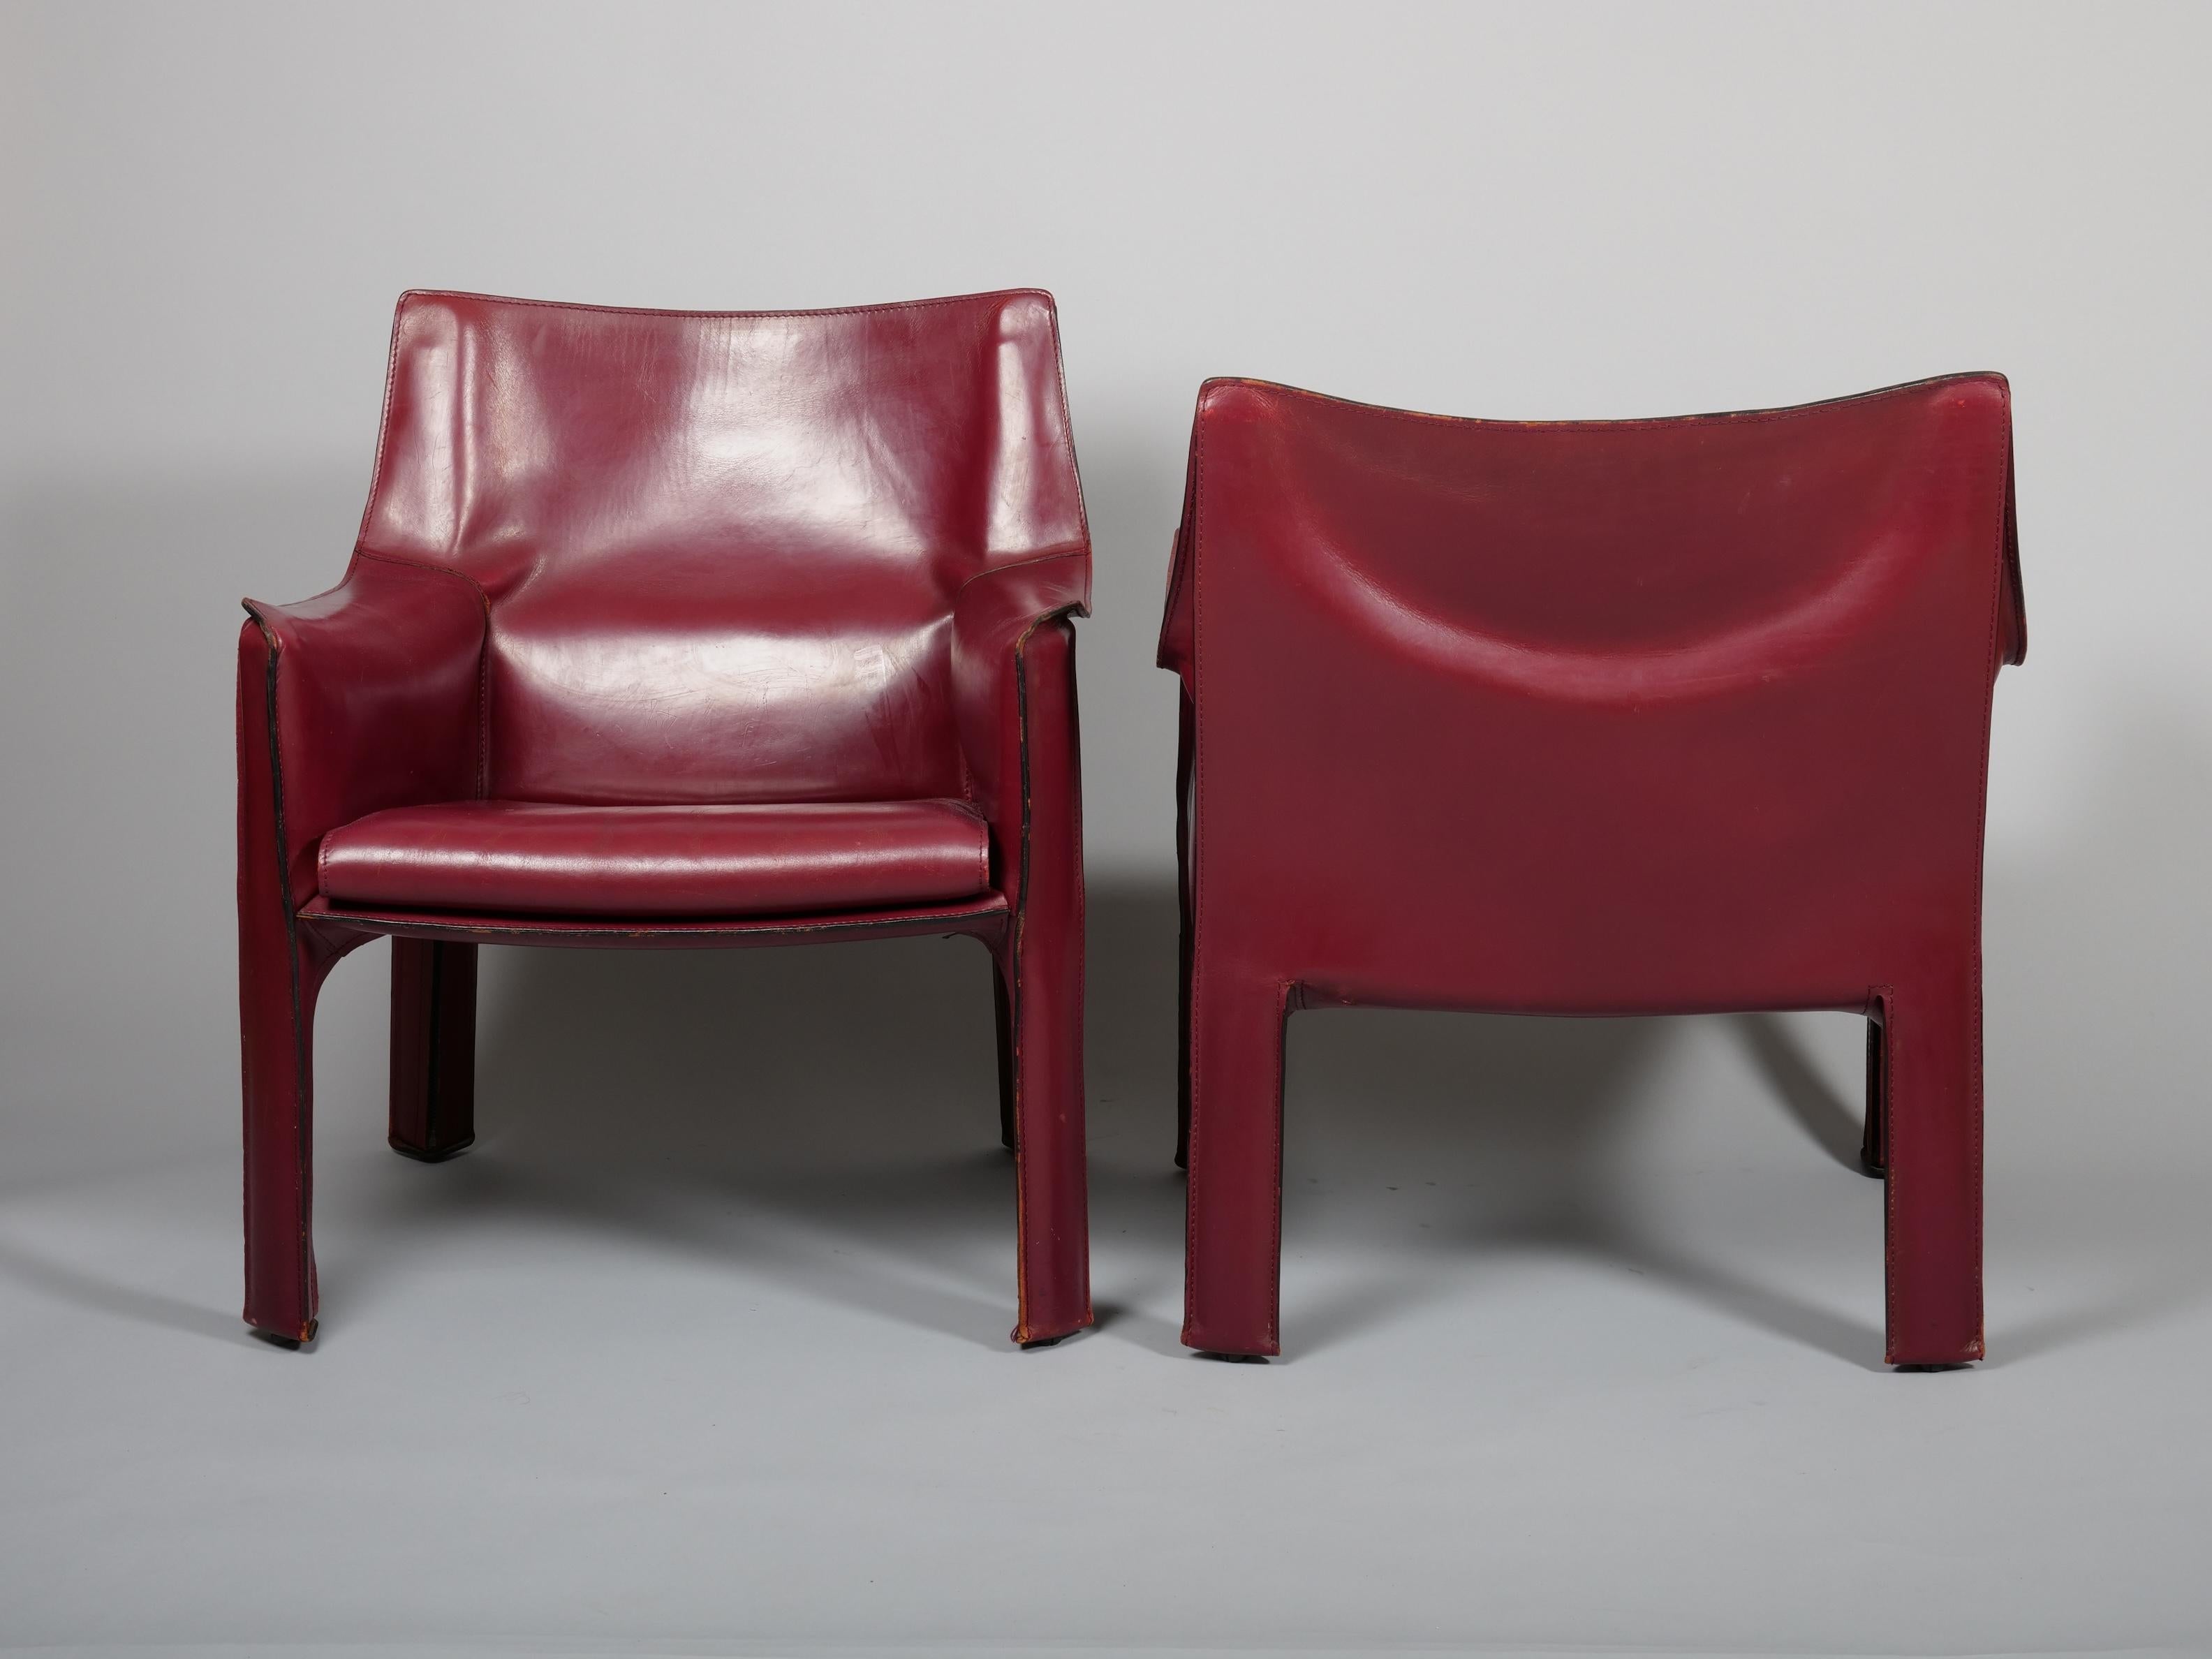 Mid-Century Modern Pair Mario Bellini China Red Leather Cab Chairs, Model 414 for Cassina Italy